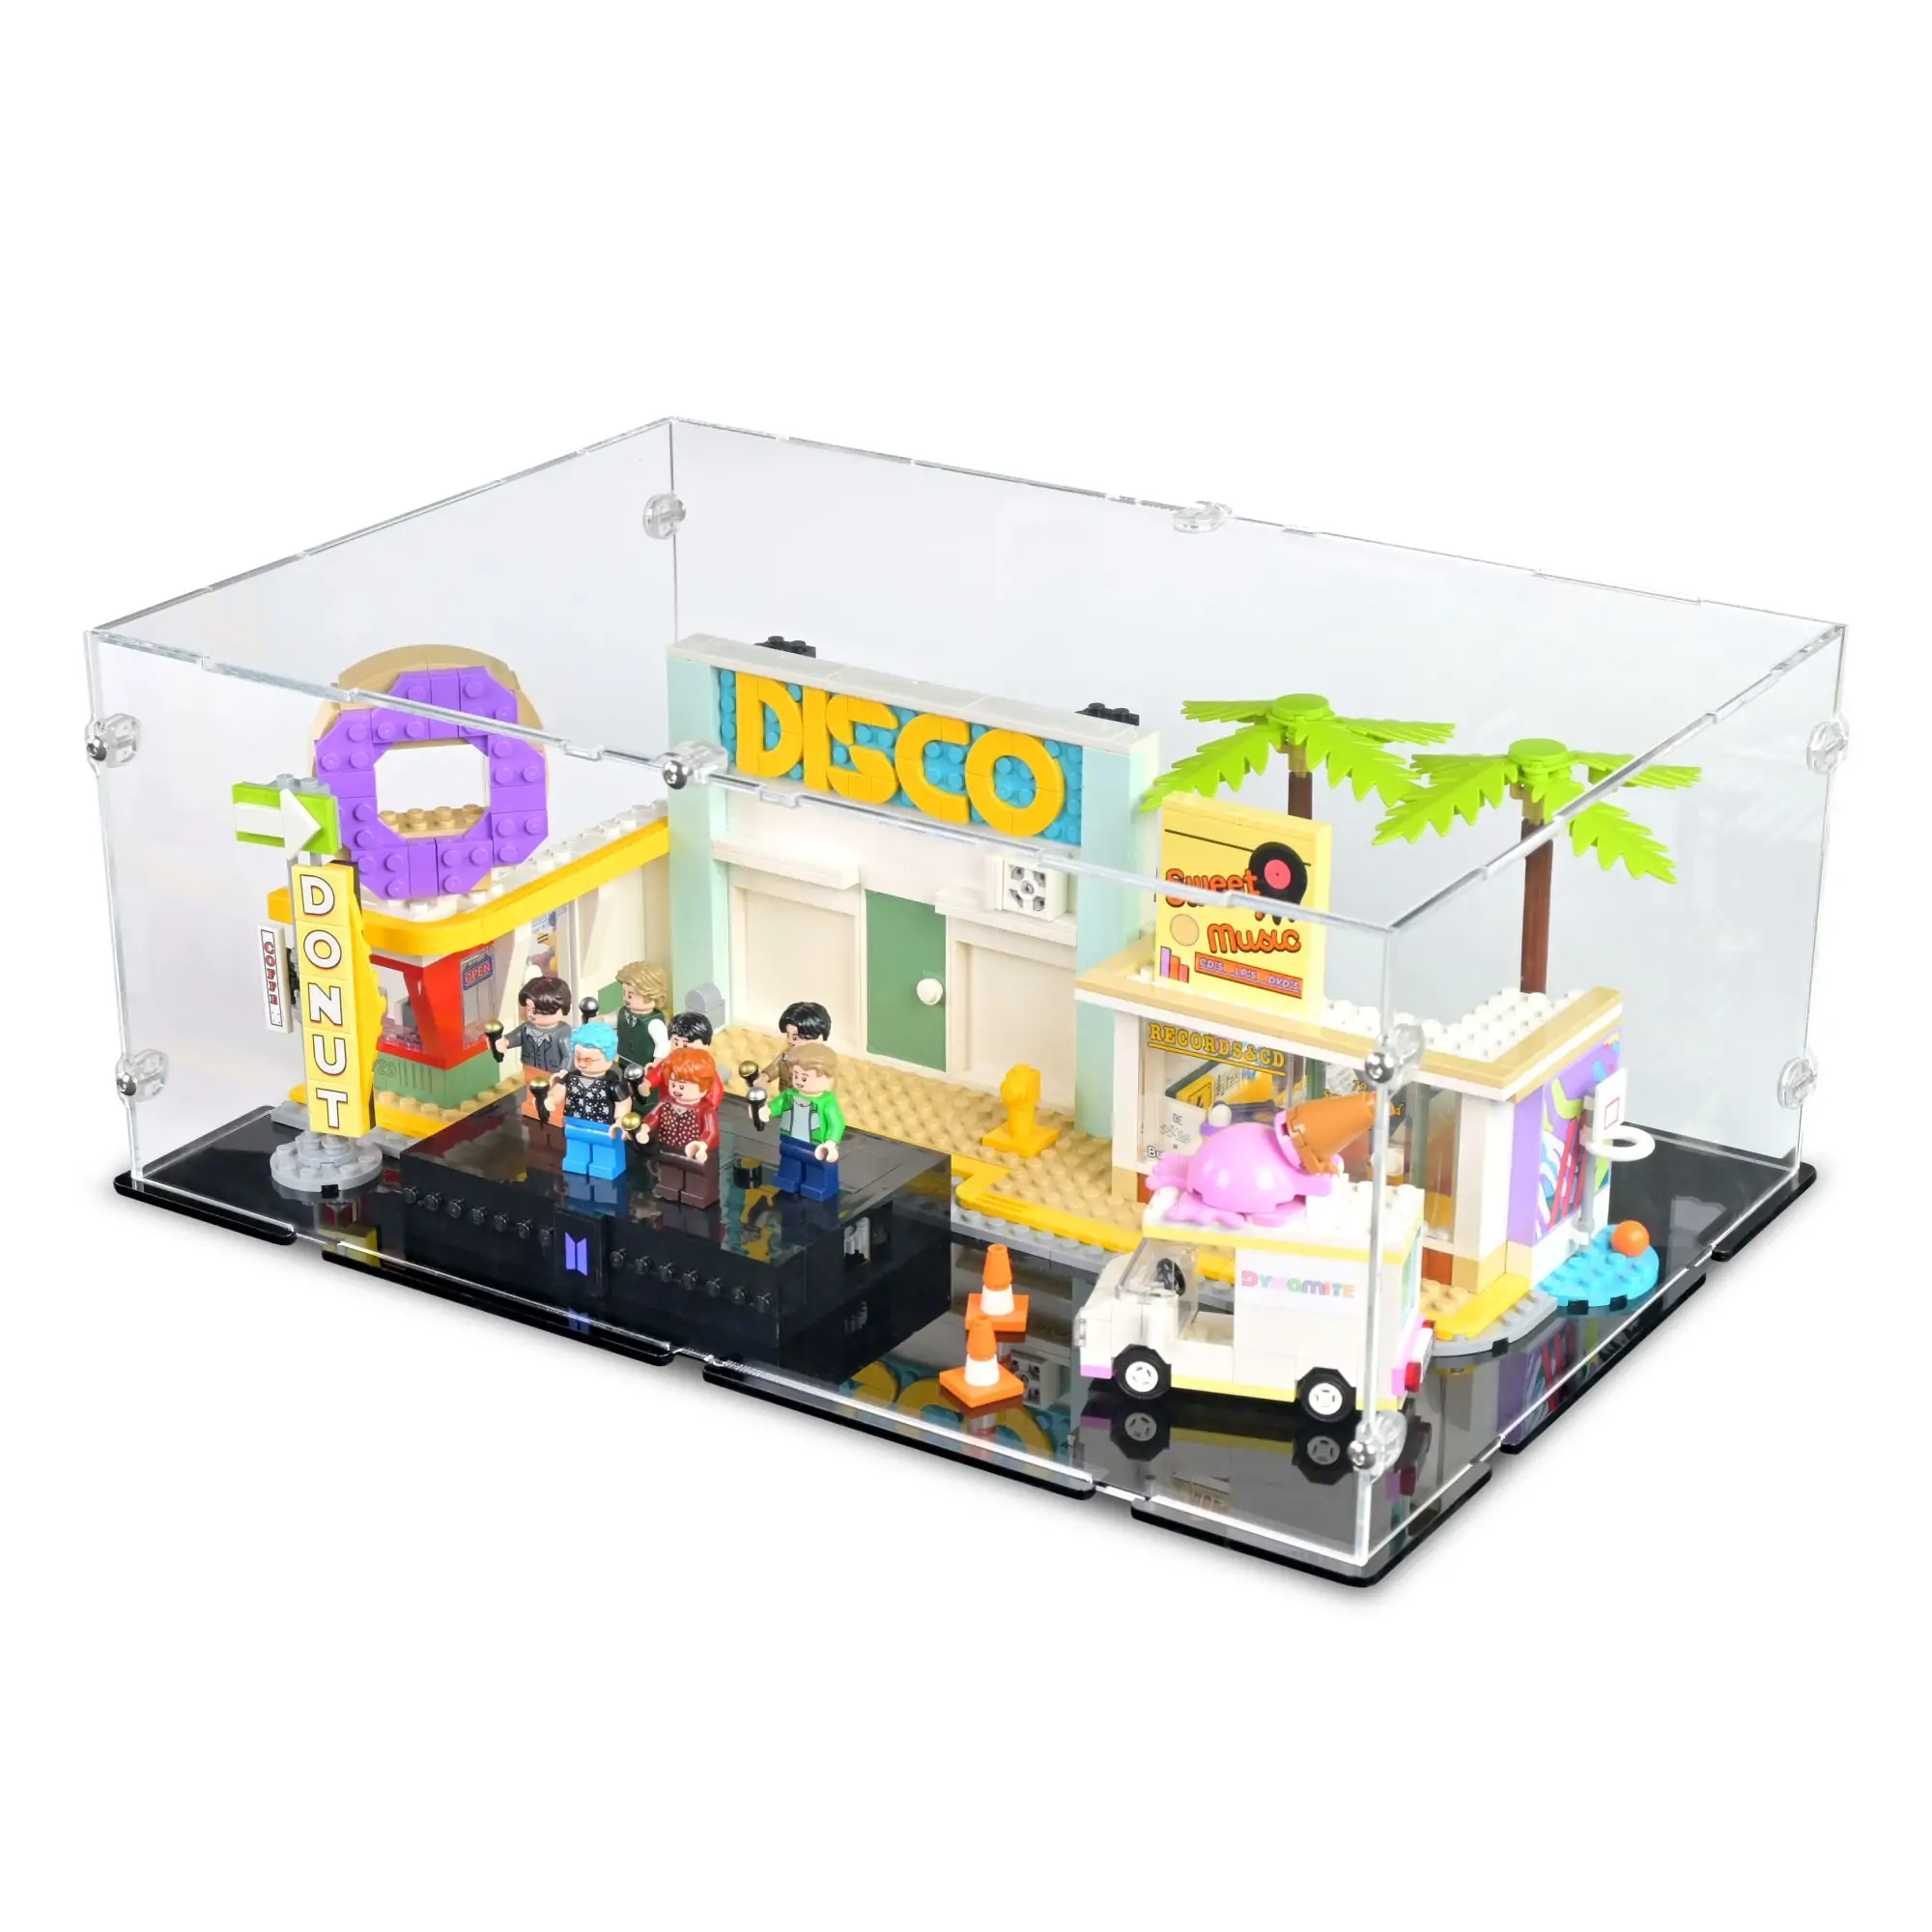 Lego 21323 Grand Piano - Display Cases by idisplayit